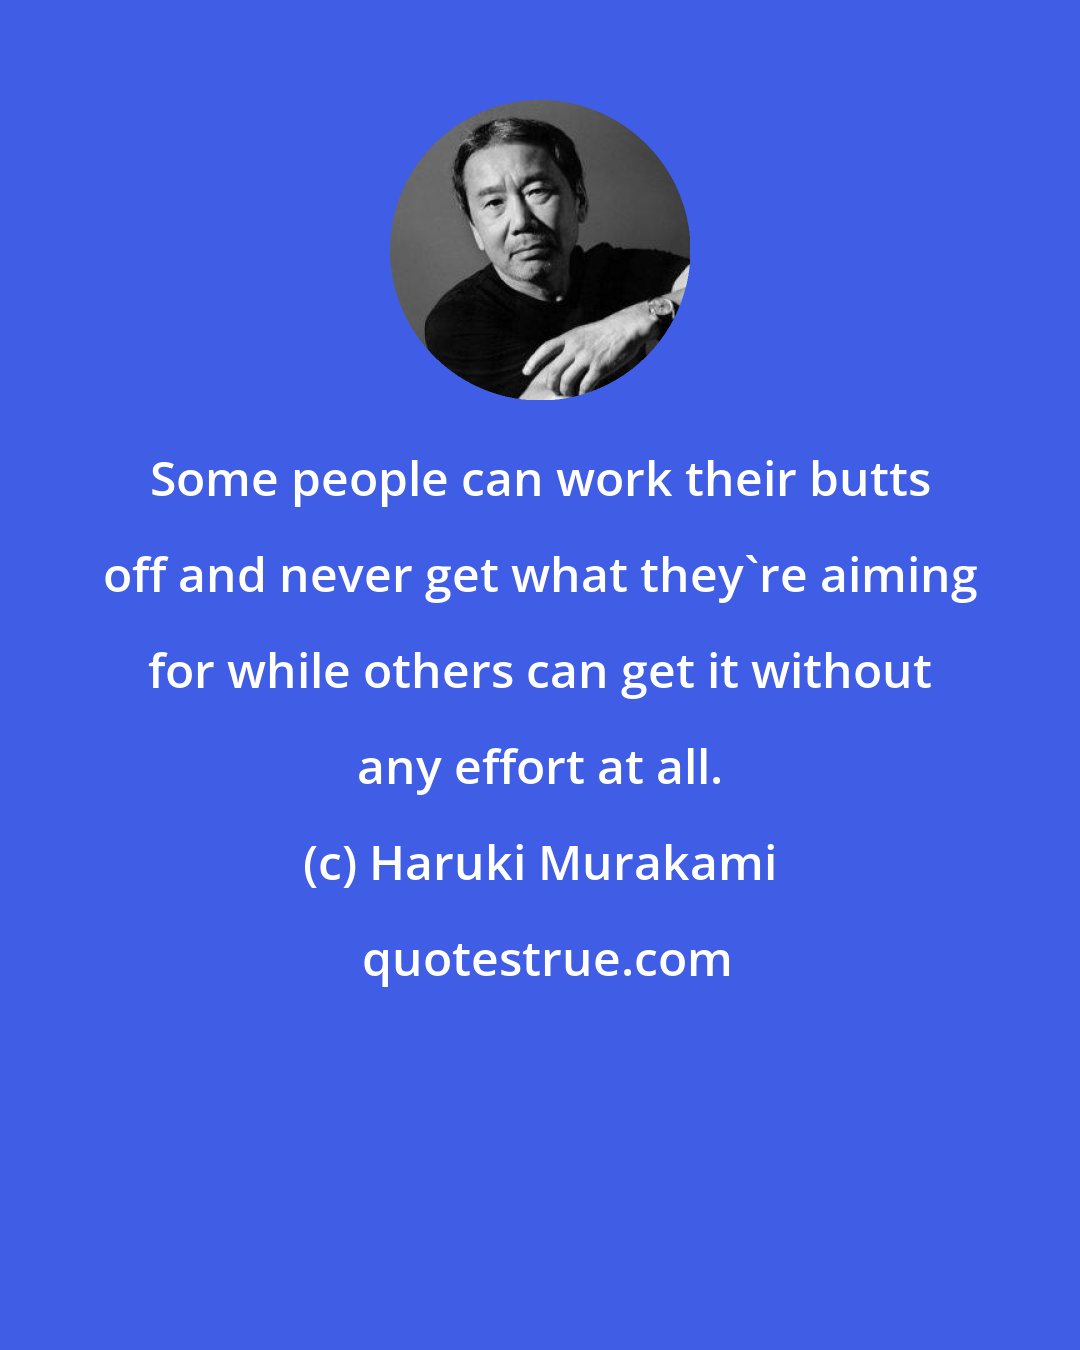 Haruki Murakami: Some people can work their butts off and never get what they're aiming for while others can get it without any effort at all.